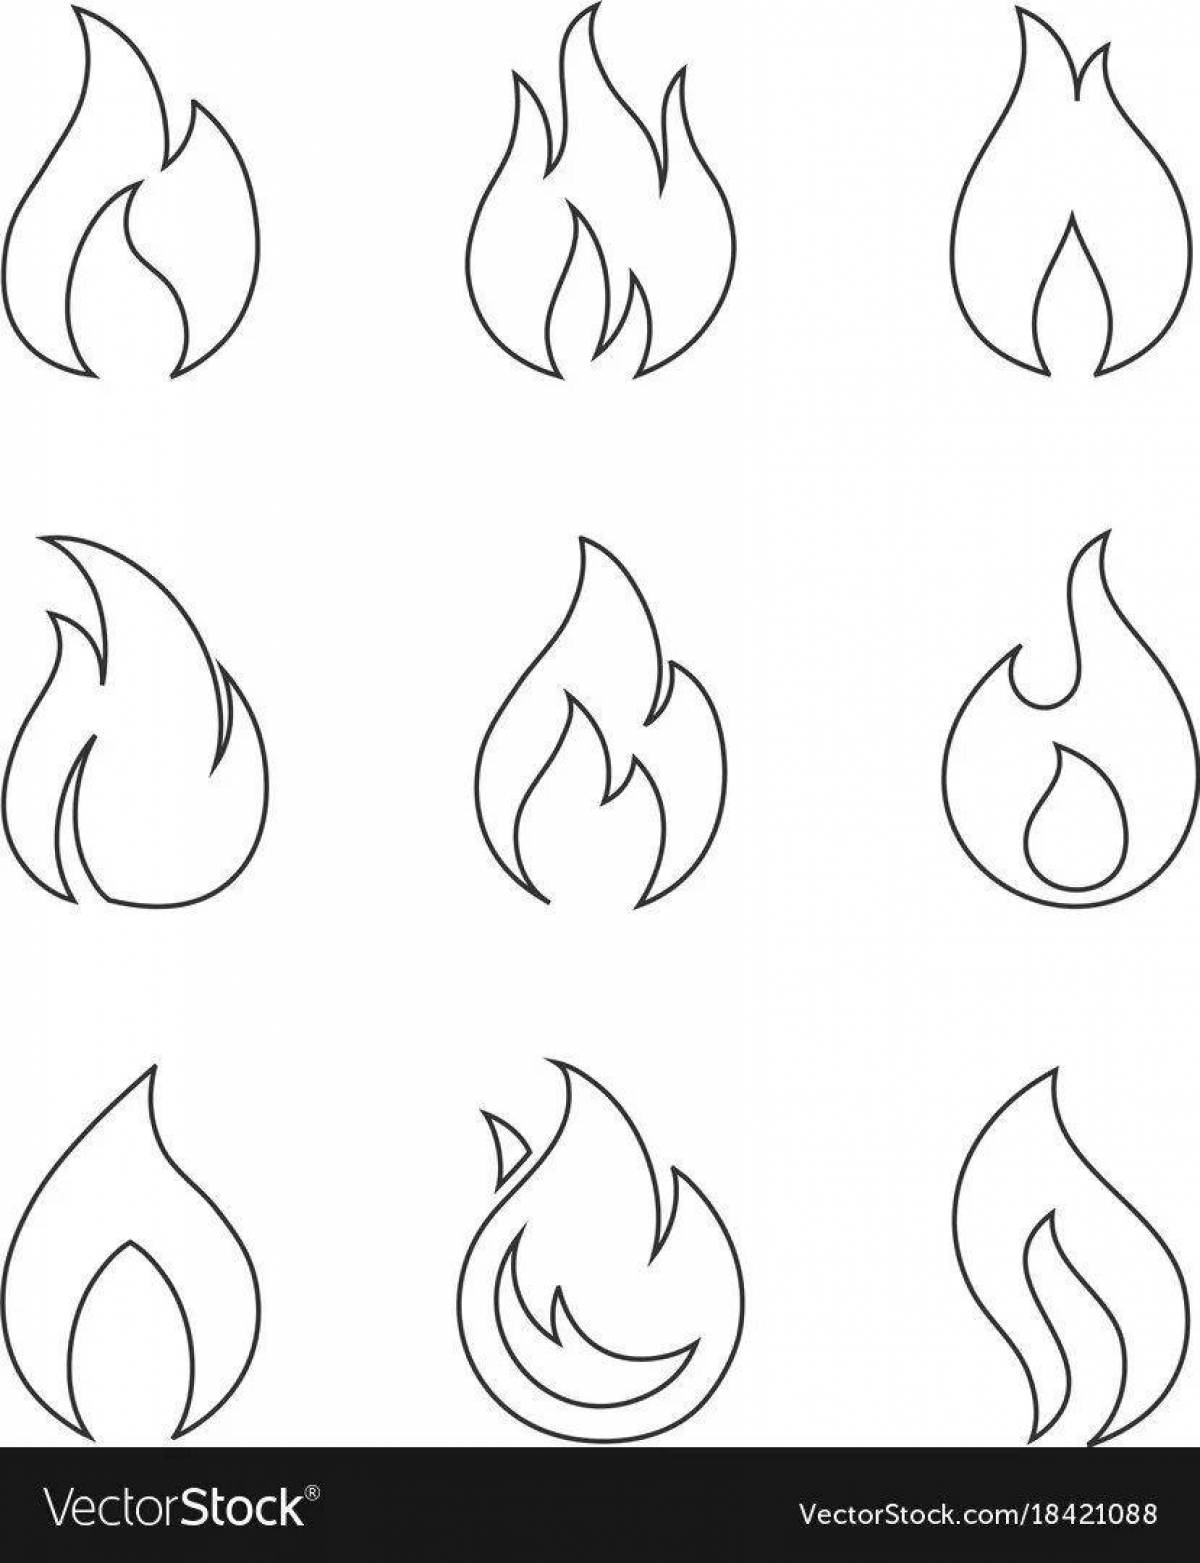 Coloring pages with flames